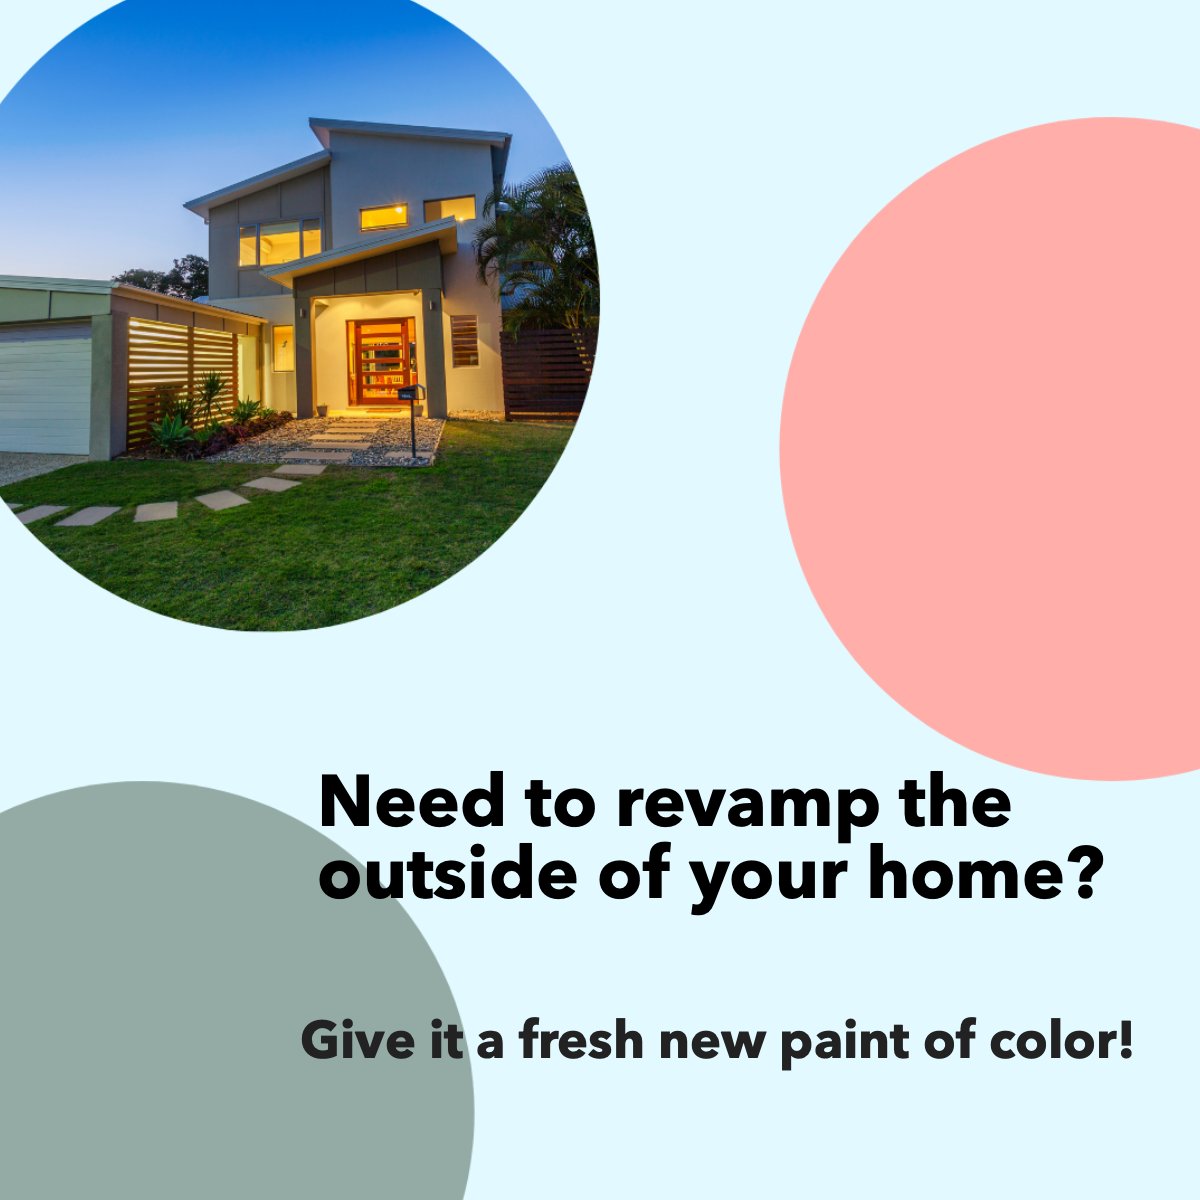 Need to revamp the outside of your home? 🎨

An exterior makeover can maximize curb appeal and give your home a whole new look. 😎

#pamcorningrealtor #plymouthcountyliving #seniorsrealestatespecialist #55PlusLiving #homesmartfirstclassrealty #babyboomer